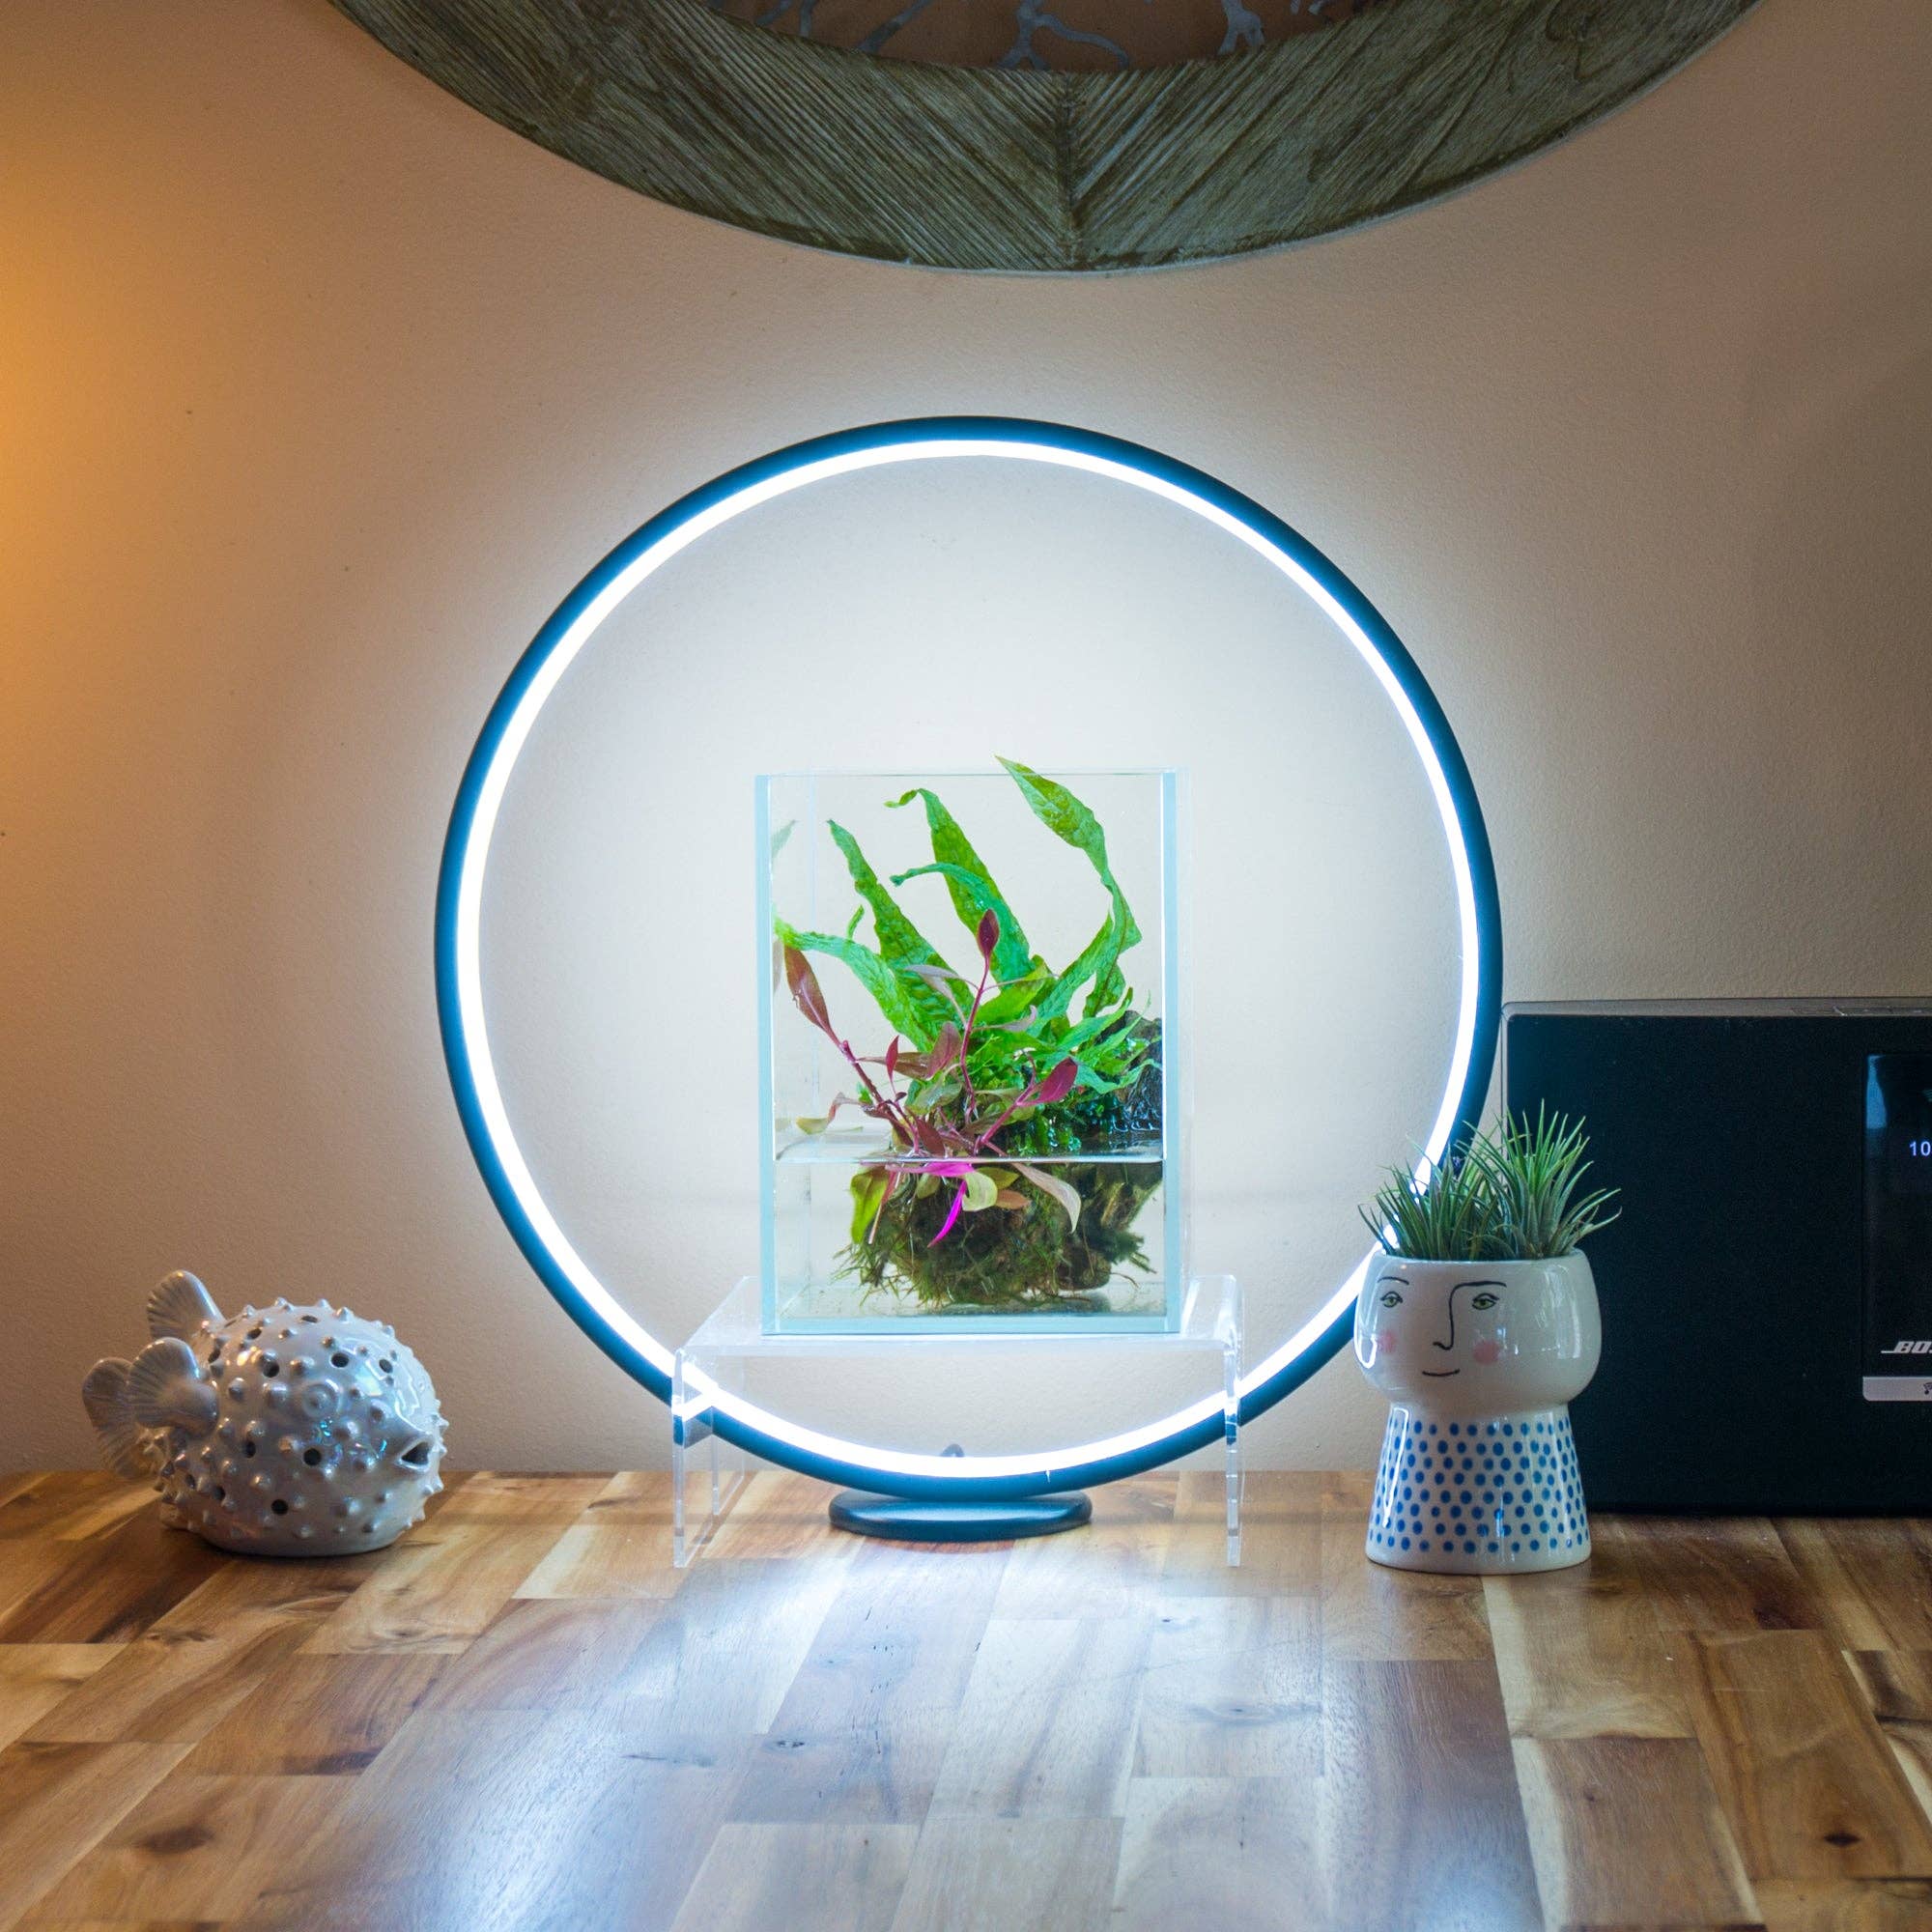 PLANT SUPPLIES - Circle Full Spectrum Plant Grow Light W/ Display Stand